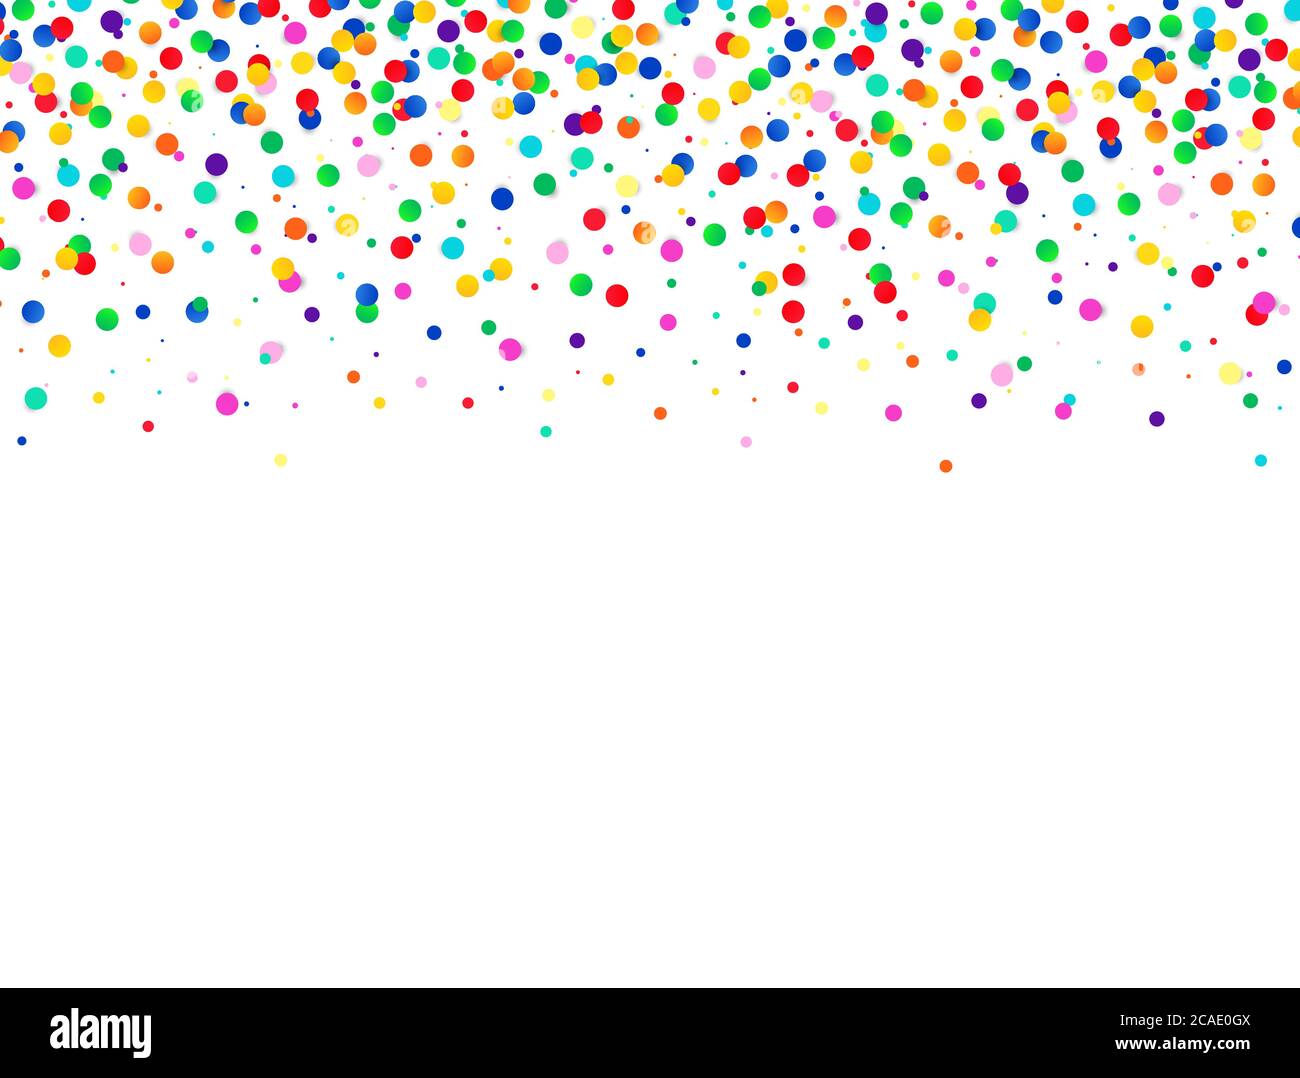 Abstract colorful background with falling confetti. Vector celebration illustration. Stock Vector